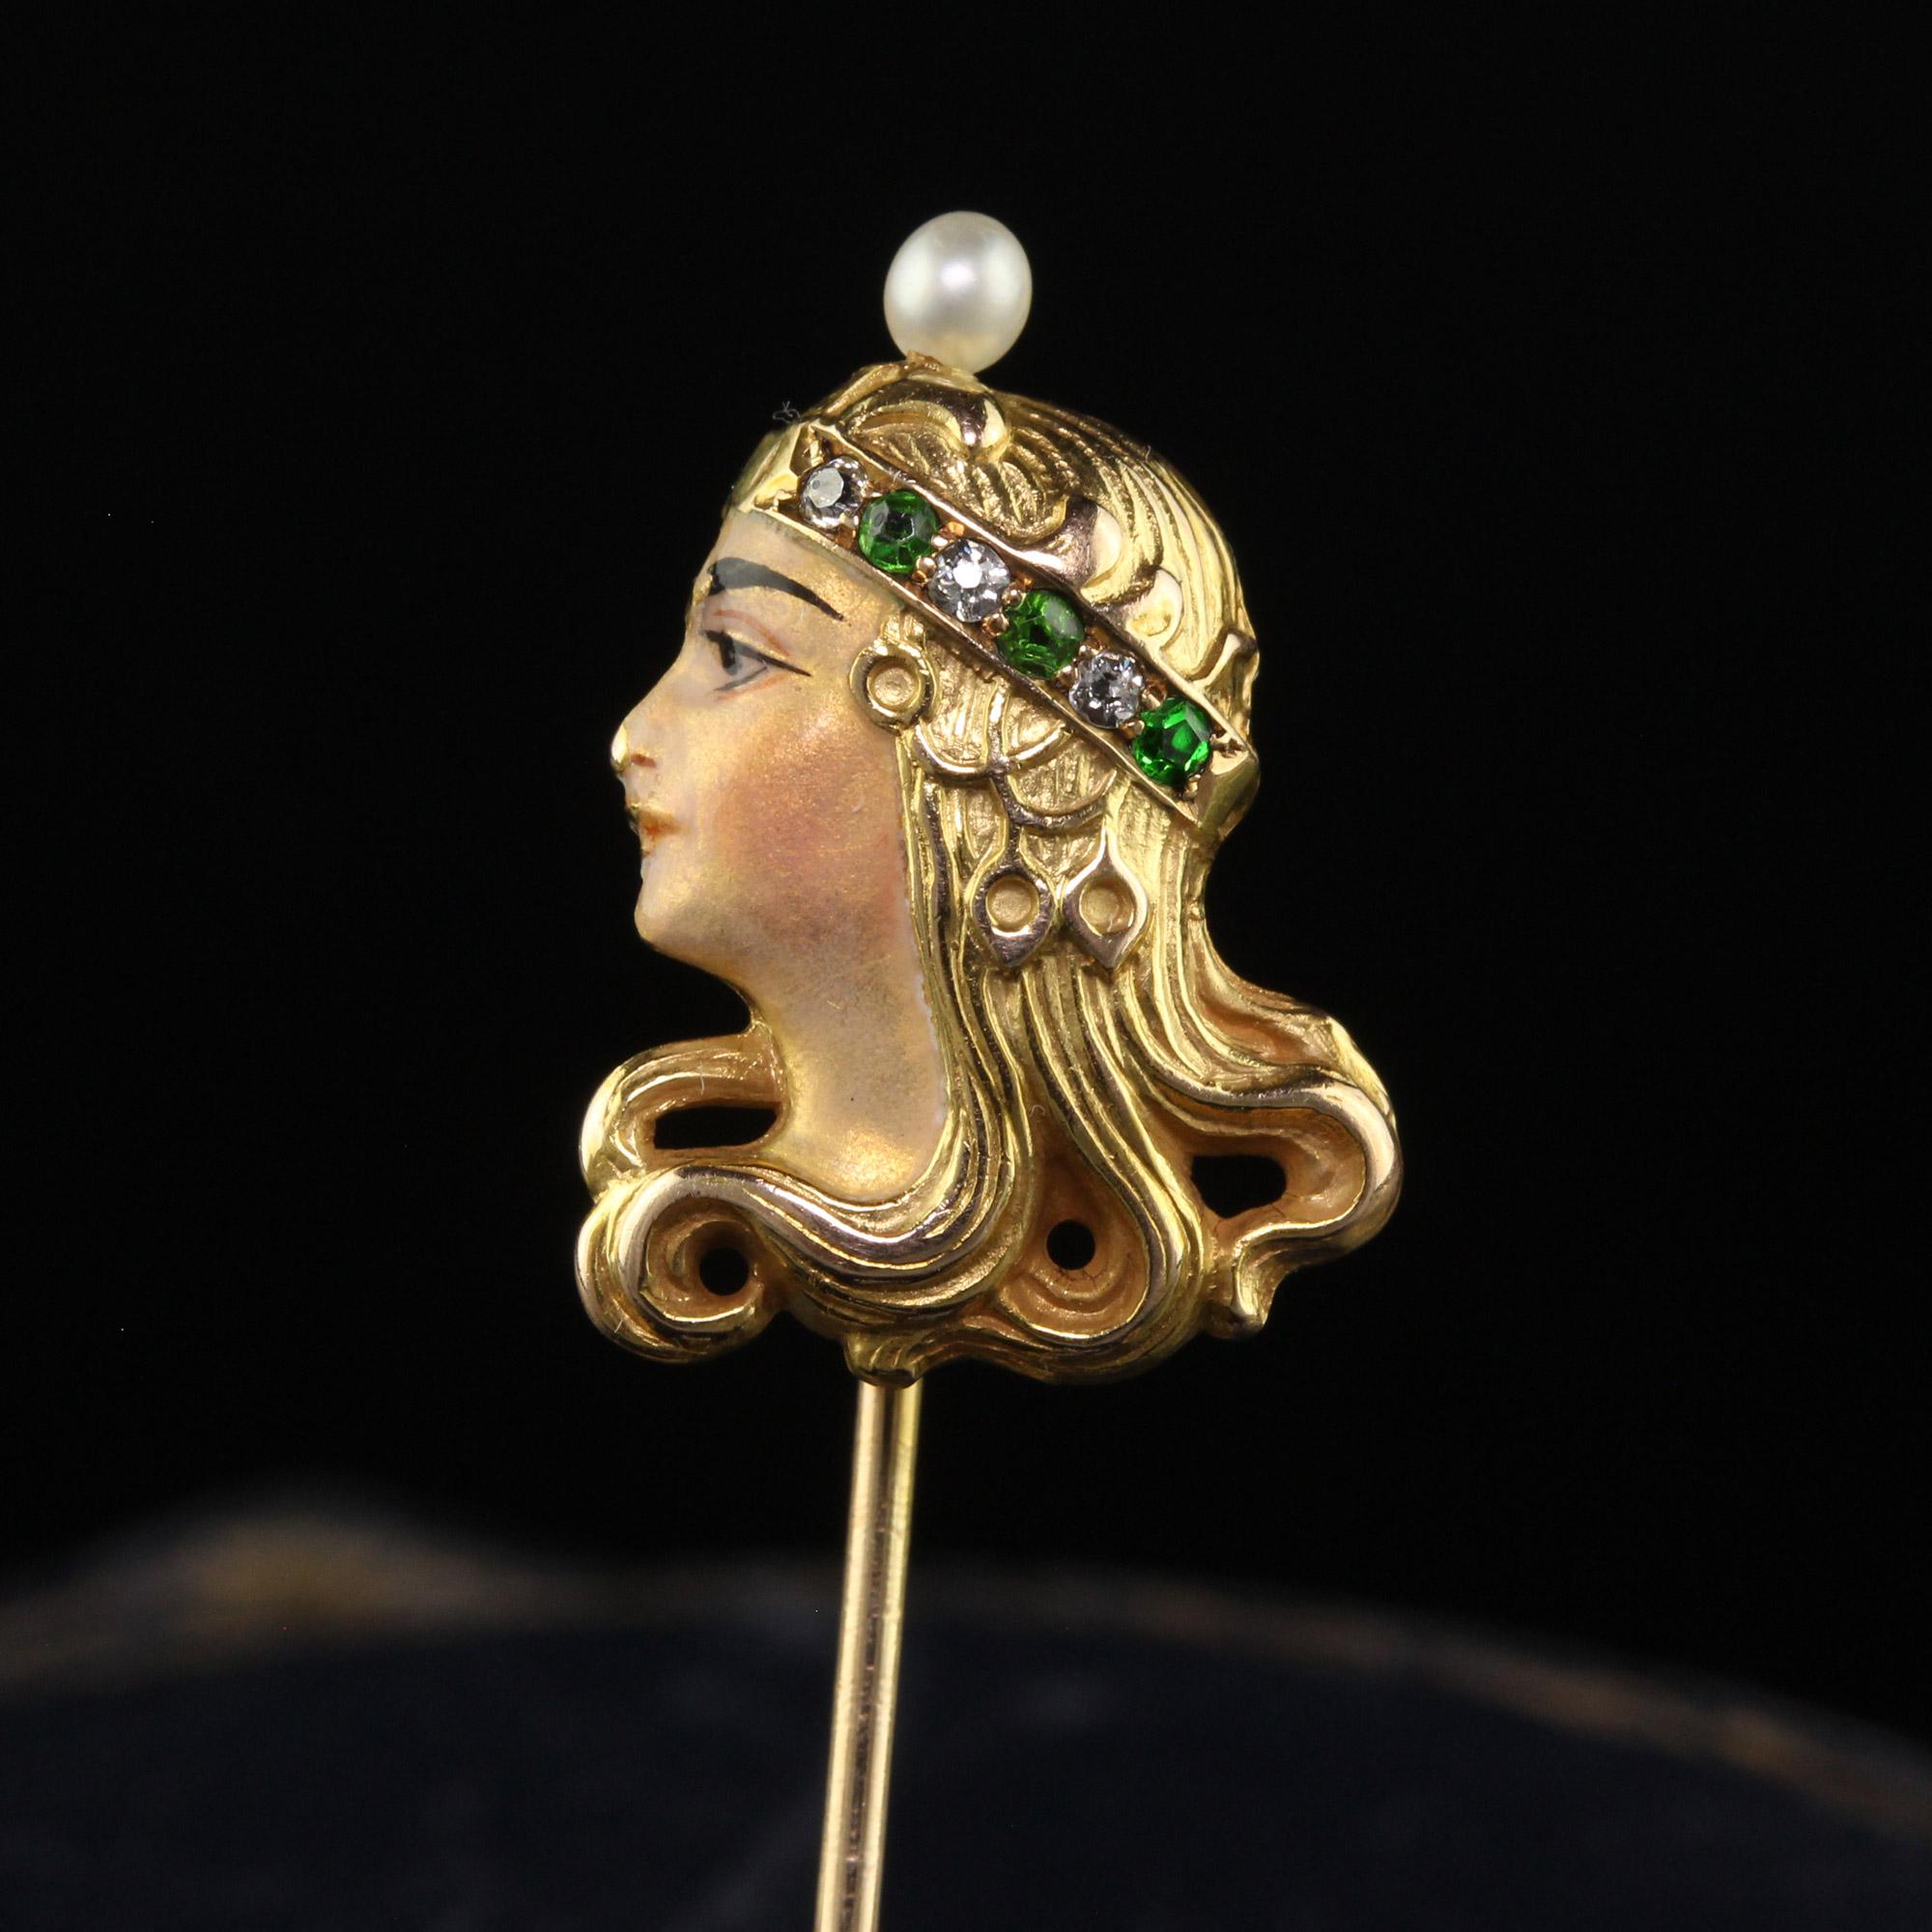 Beautiful Antique Art Nouveau 18K Yellow Gold Diamond Demantoid Pearl Lady Stick Pin. This incredible Art Nouveau stick pin is crafted in 18k yellow gold. The pin features a profile of a lady with a hand band that has diamonds and demantoid garnets